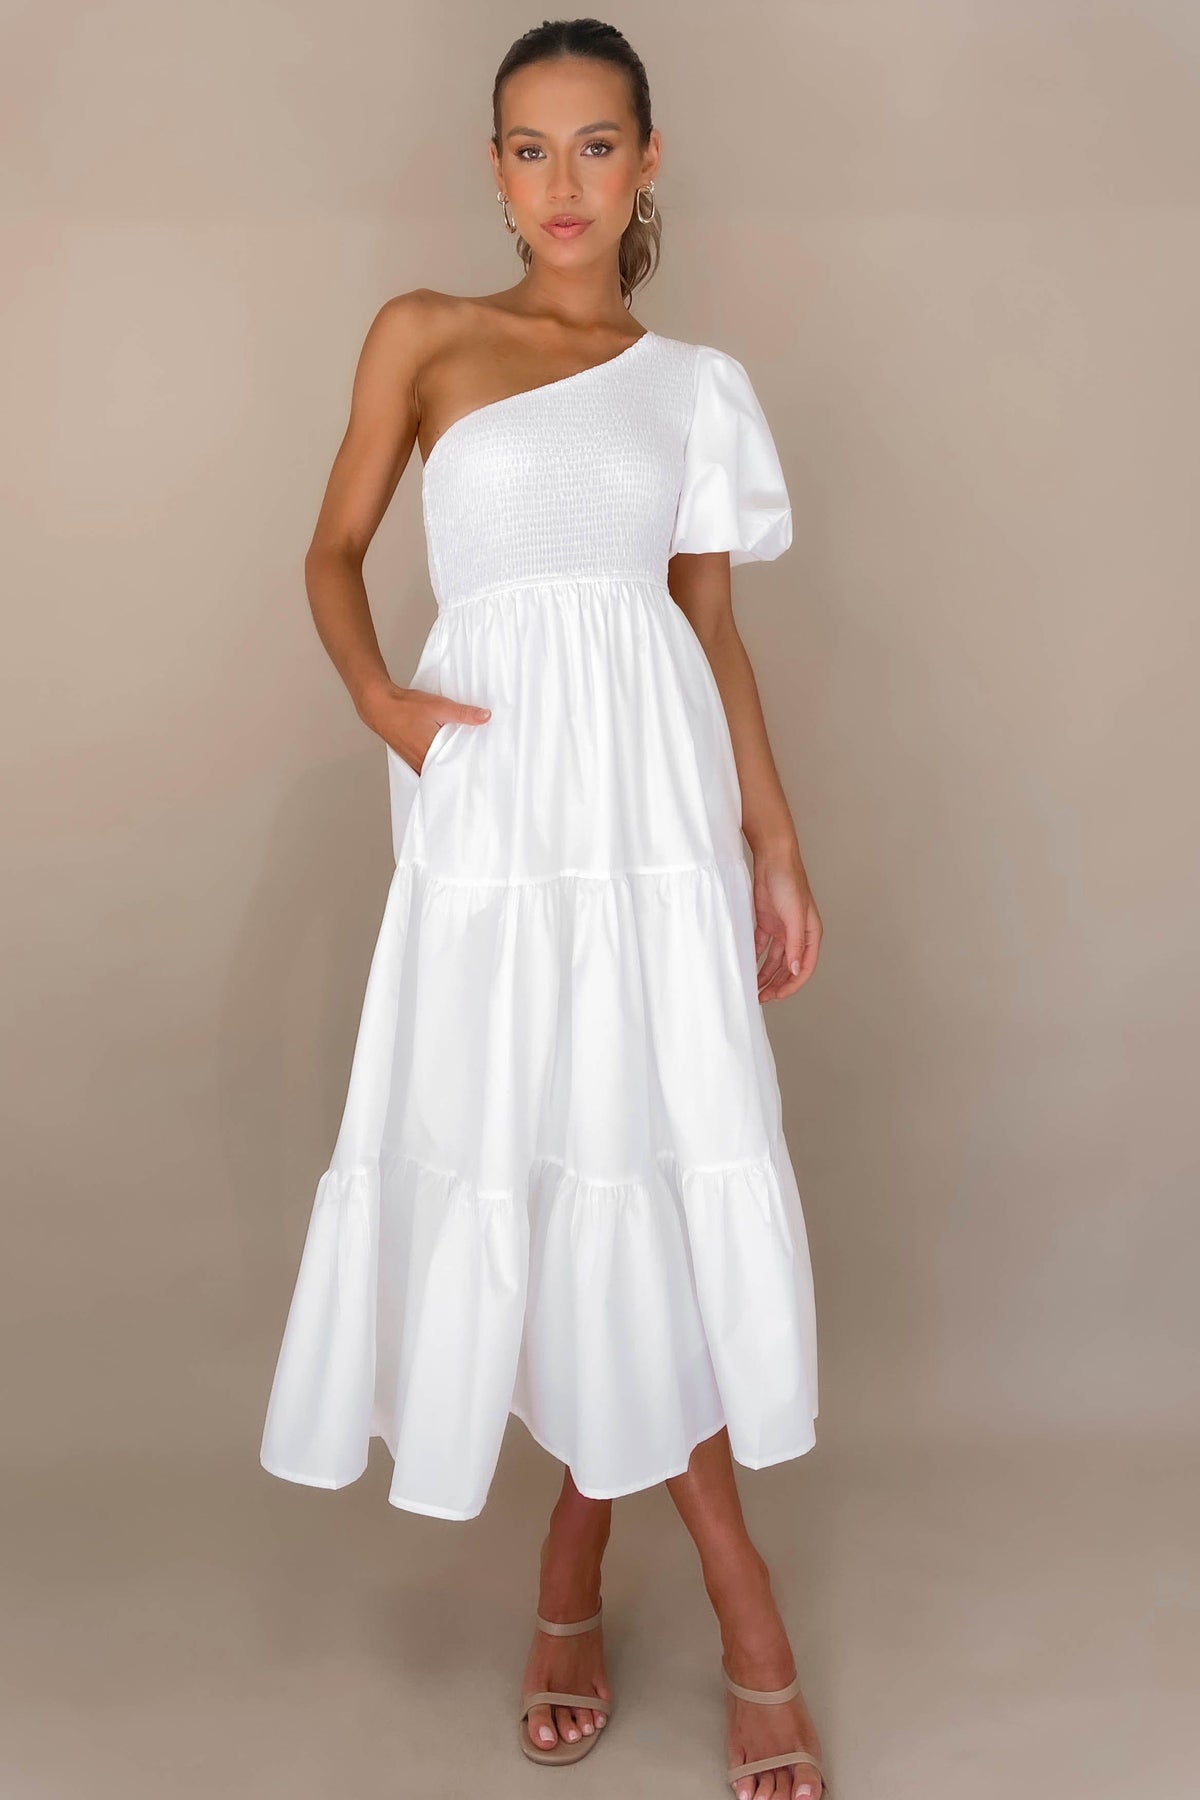 Parrish Dress, COTTON &amp; RAYON, COTTON AND RAYON, DRESS, DRESSES, MIDI DRESS, RAYON &amp; COTTON, RAYON AND COTTON, WHITE, , -MISHKAH